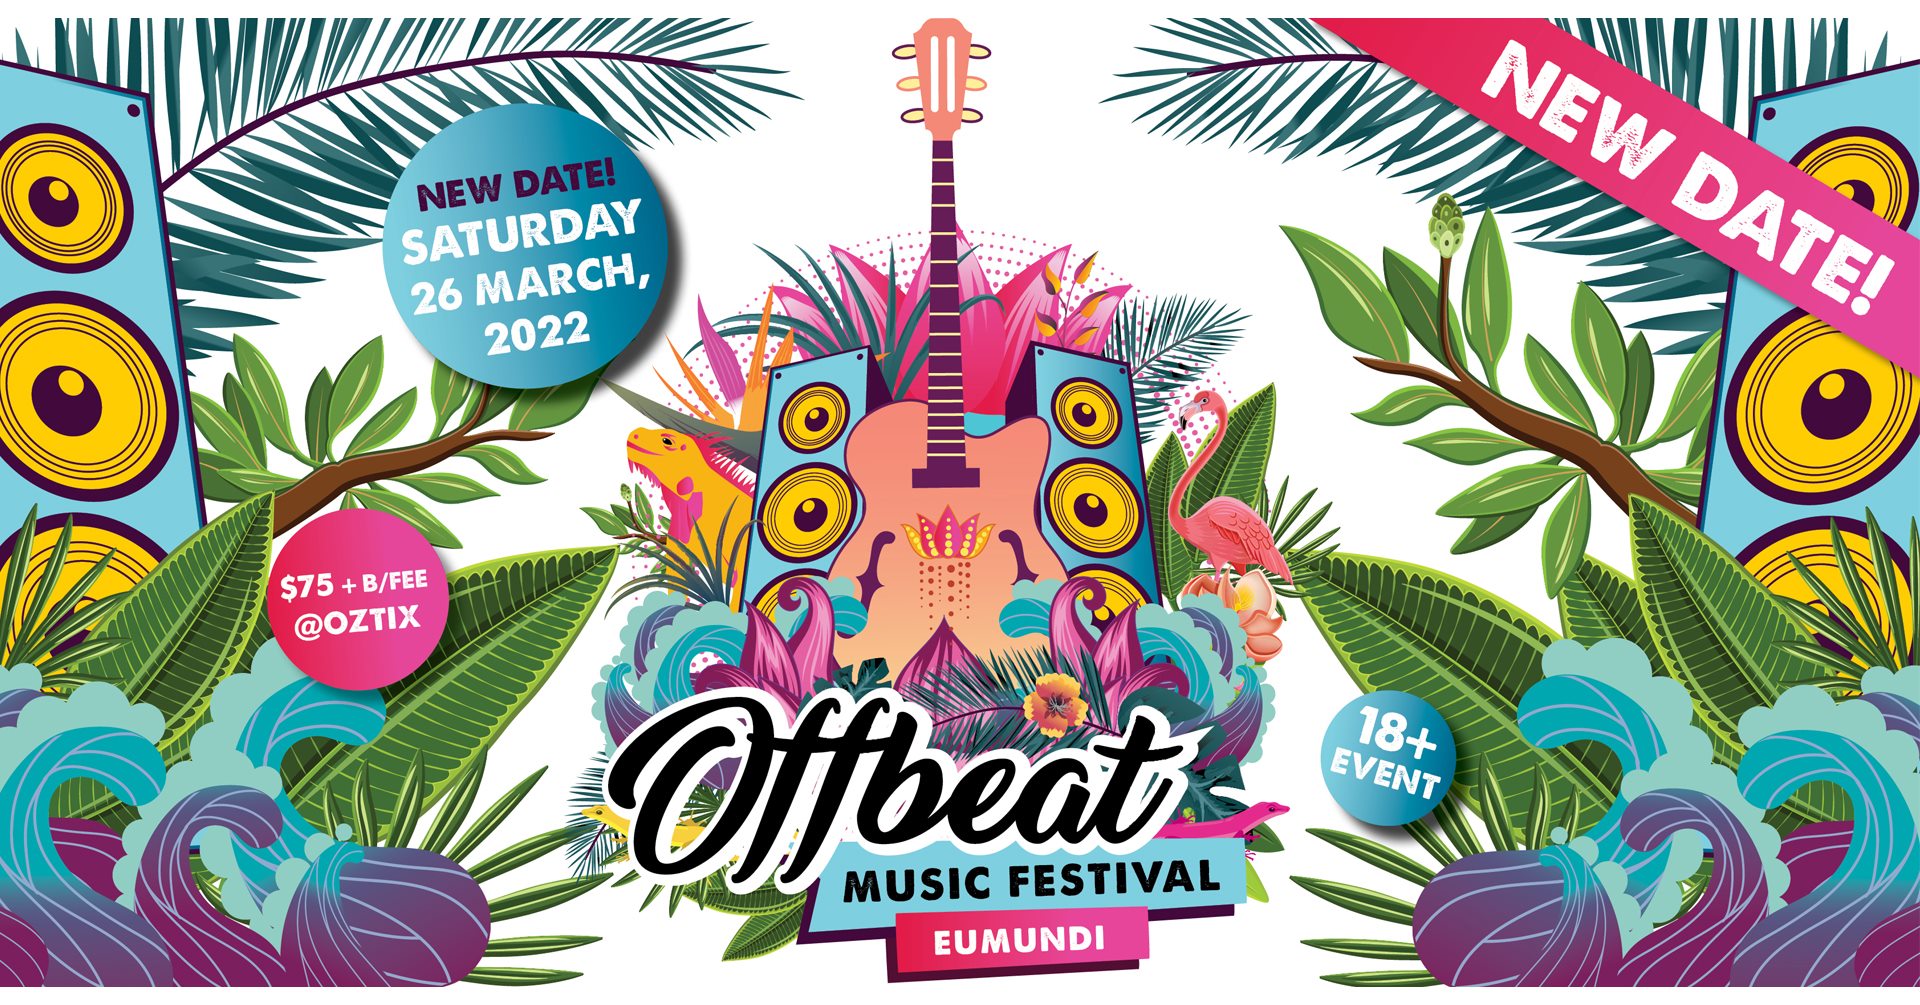 Offbeat Music Festival Image (New Date - March)